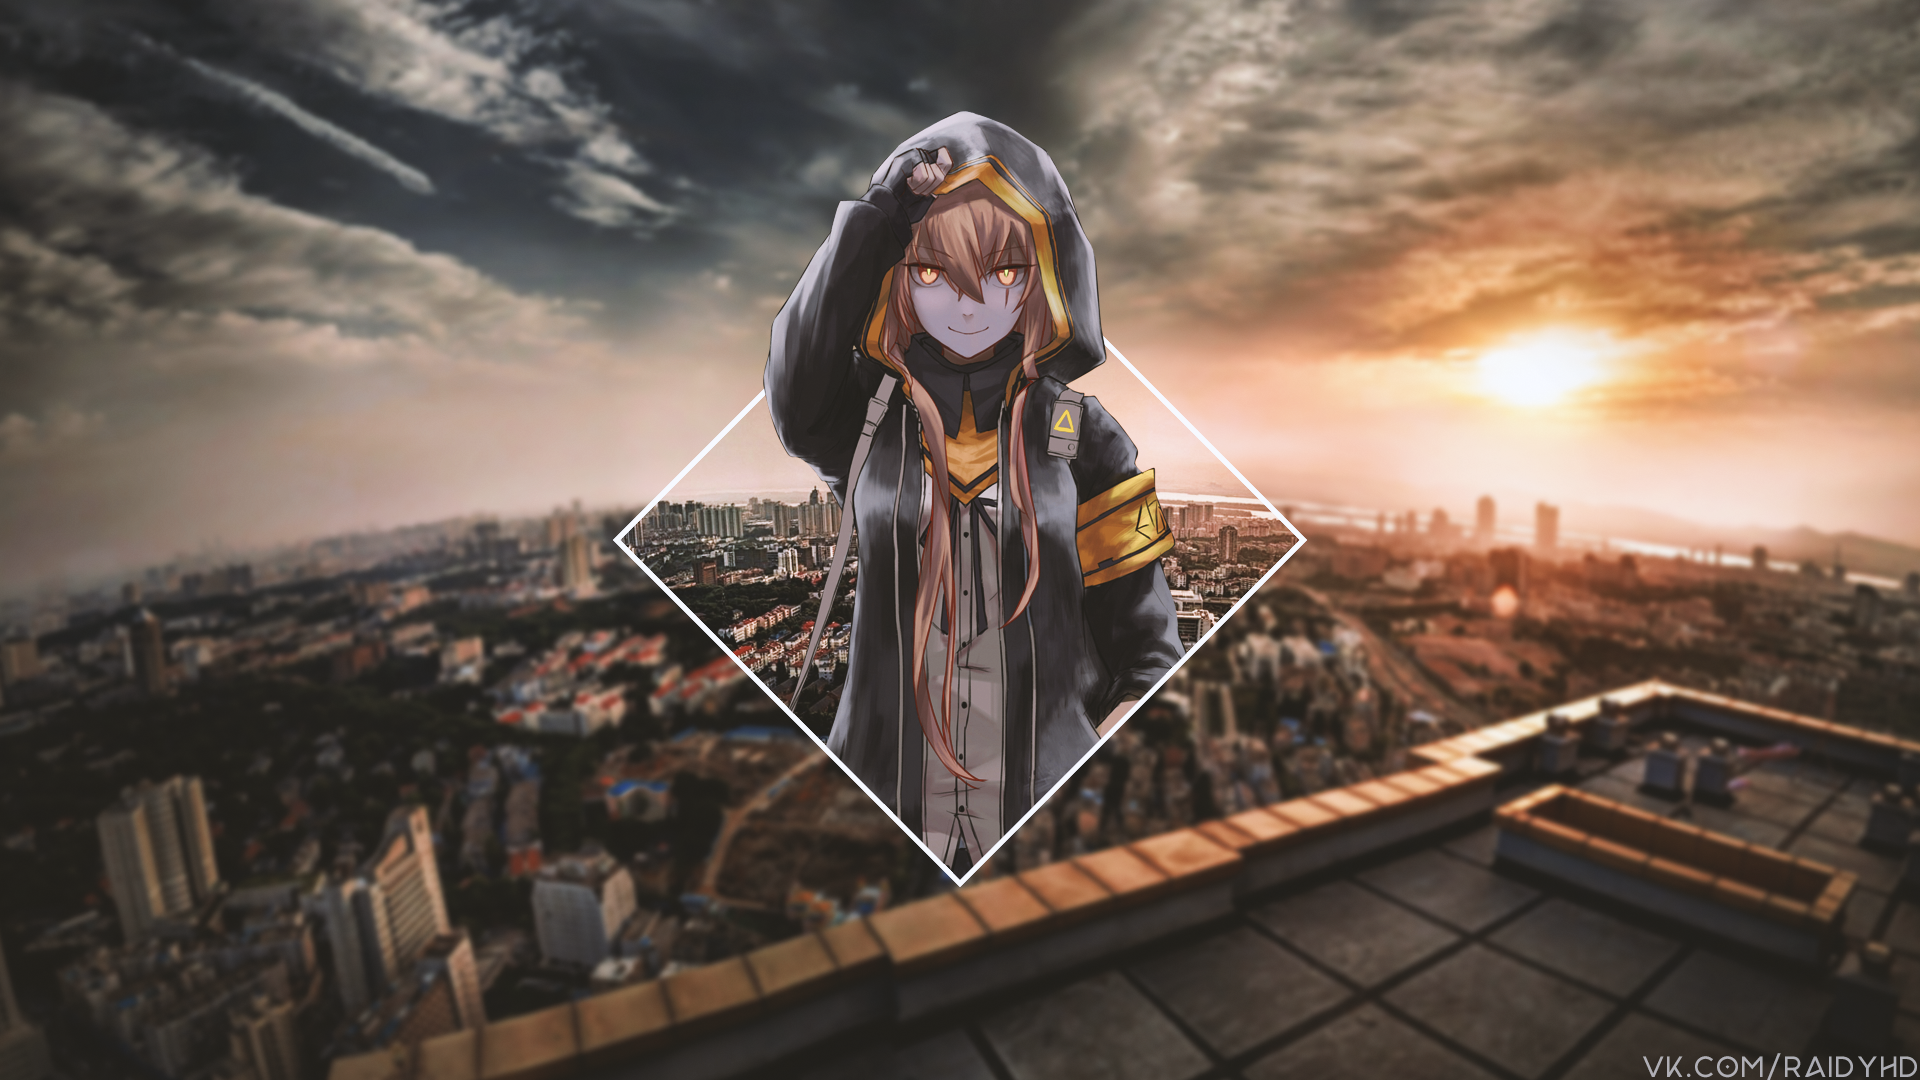 Anime 1920x1080 anime anime girls picture-in-picture Girls Frontline